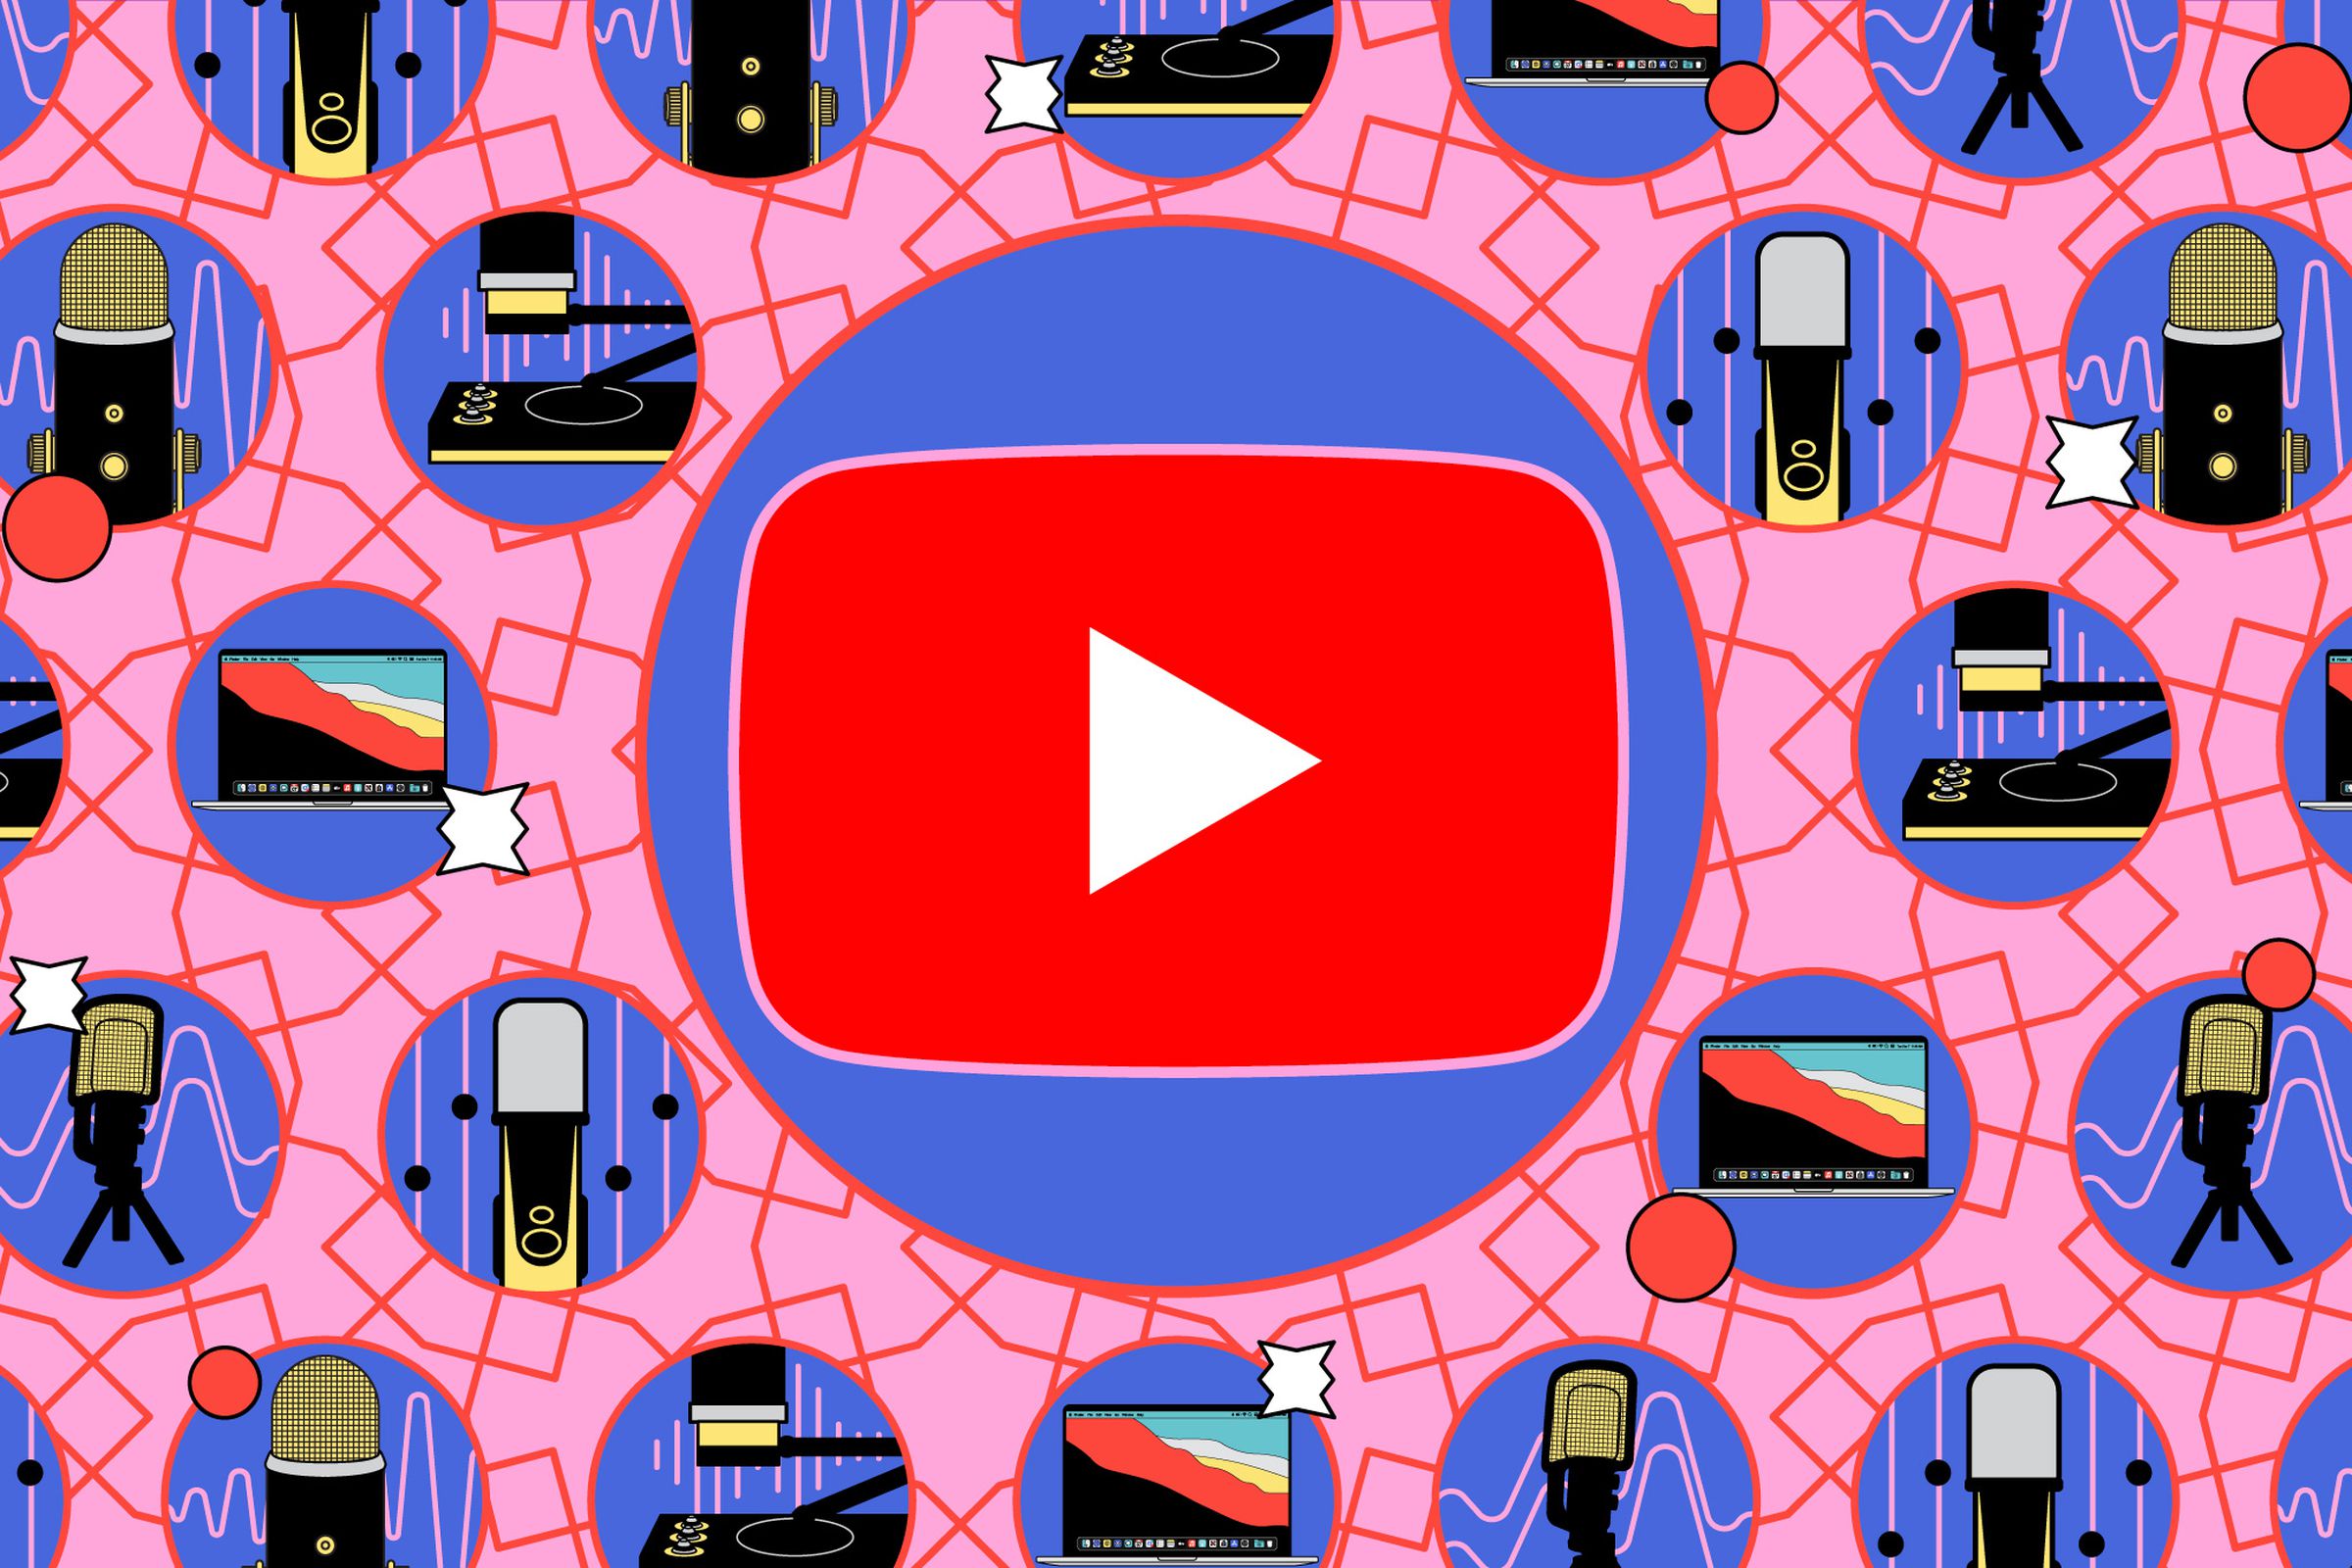 An illustration of the YouTube logo